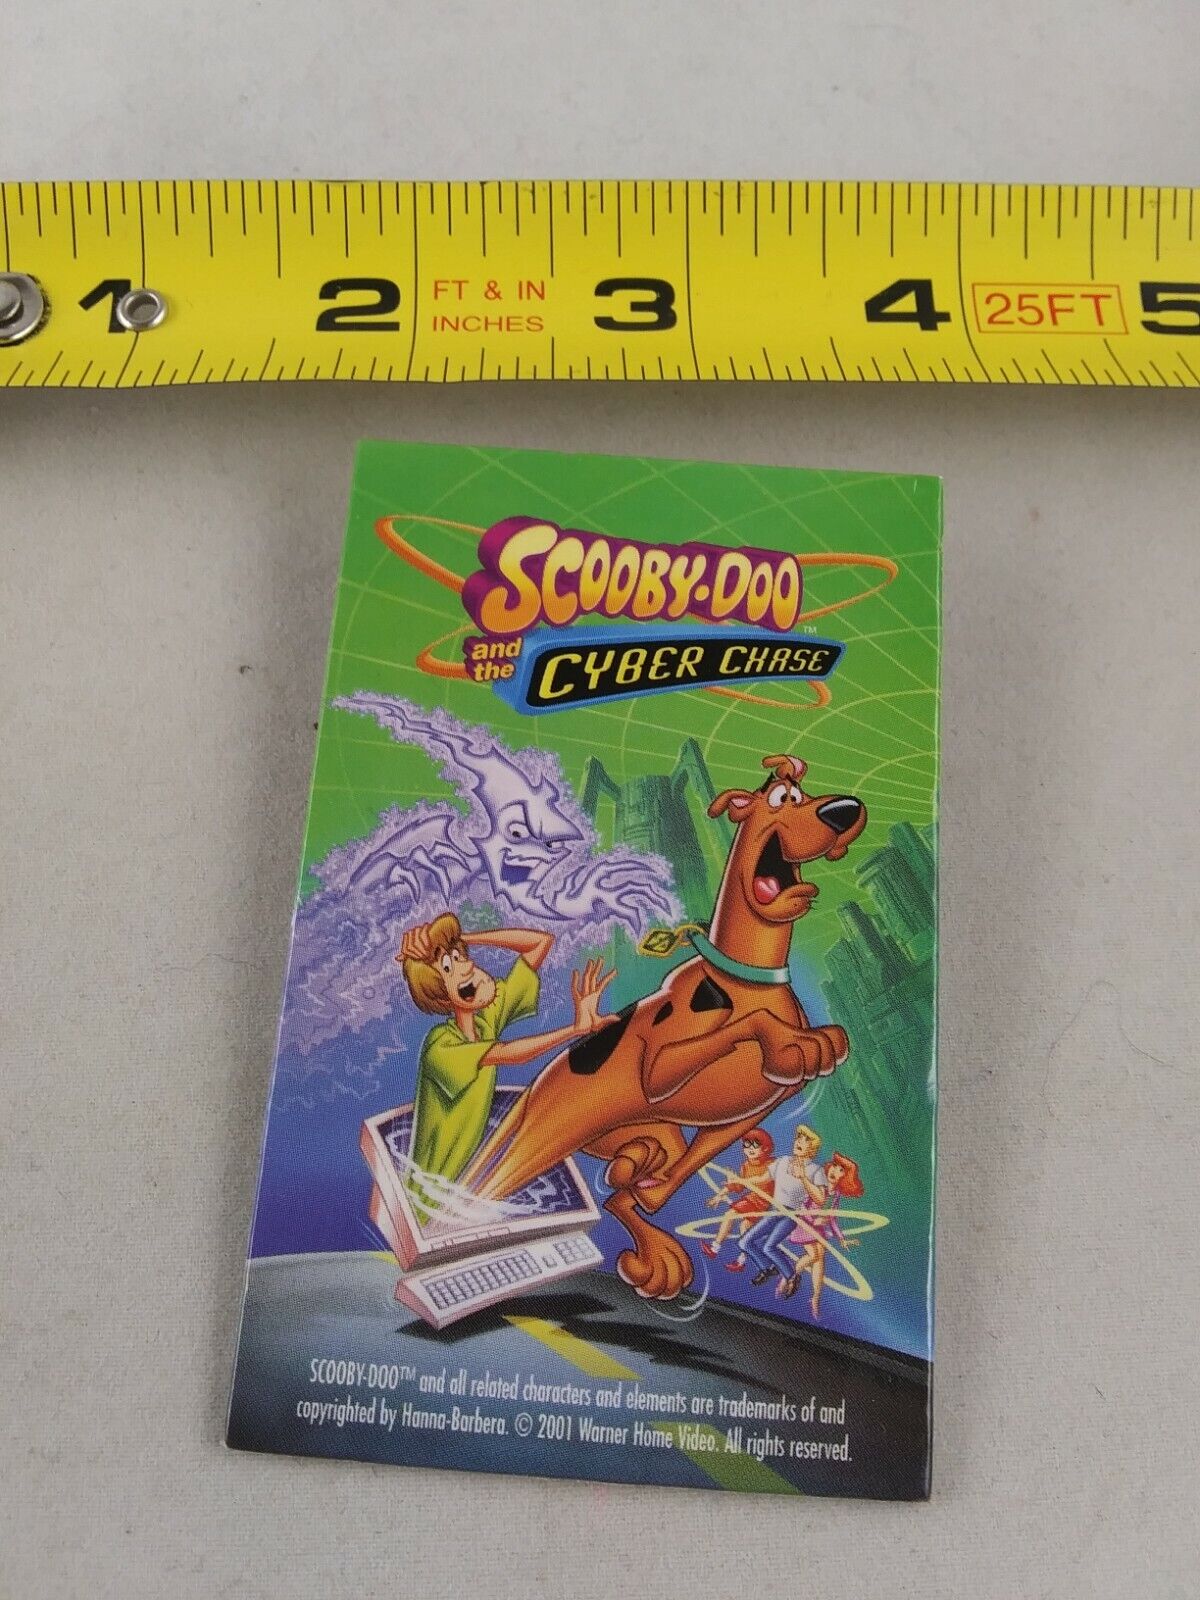 Vintage SCOOBY DOO & The Cyber Chase Promo Button Pinback Pin *QQ29